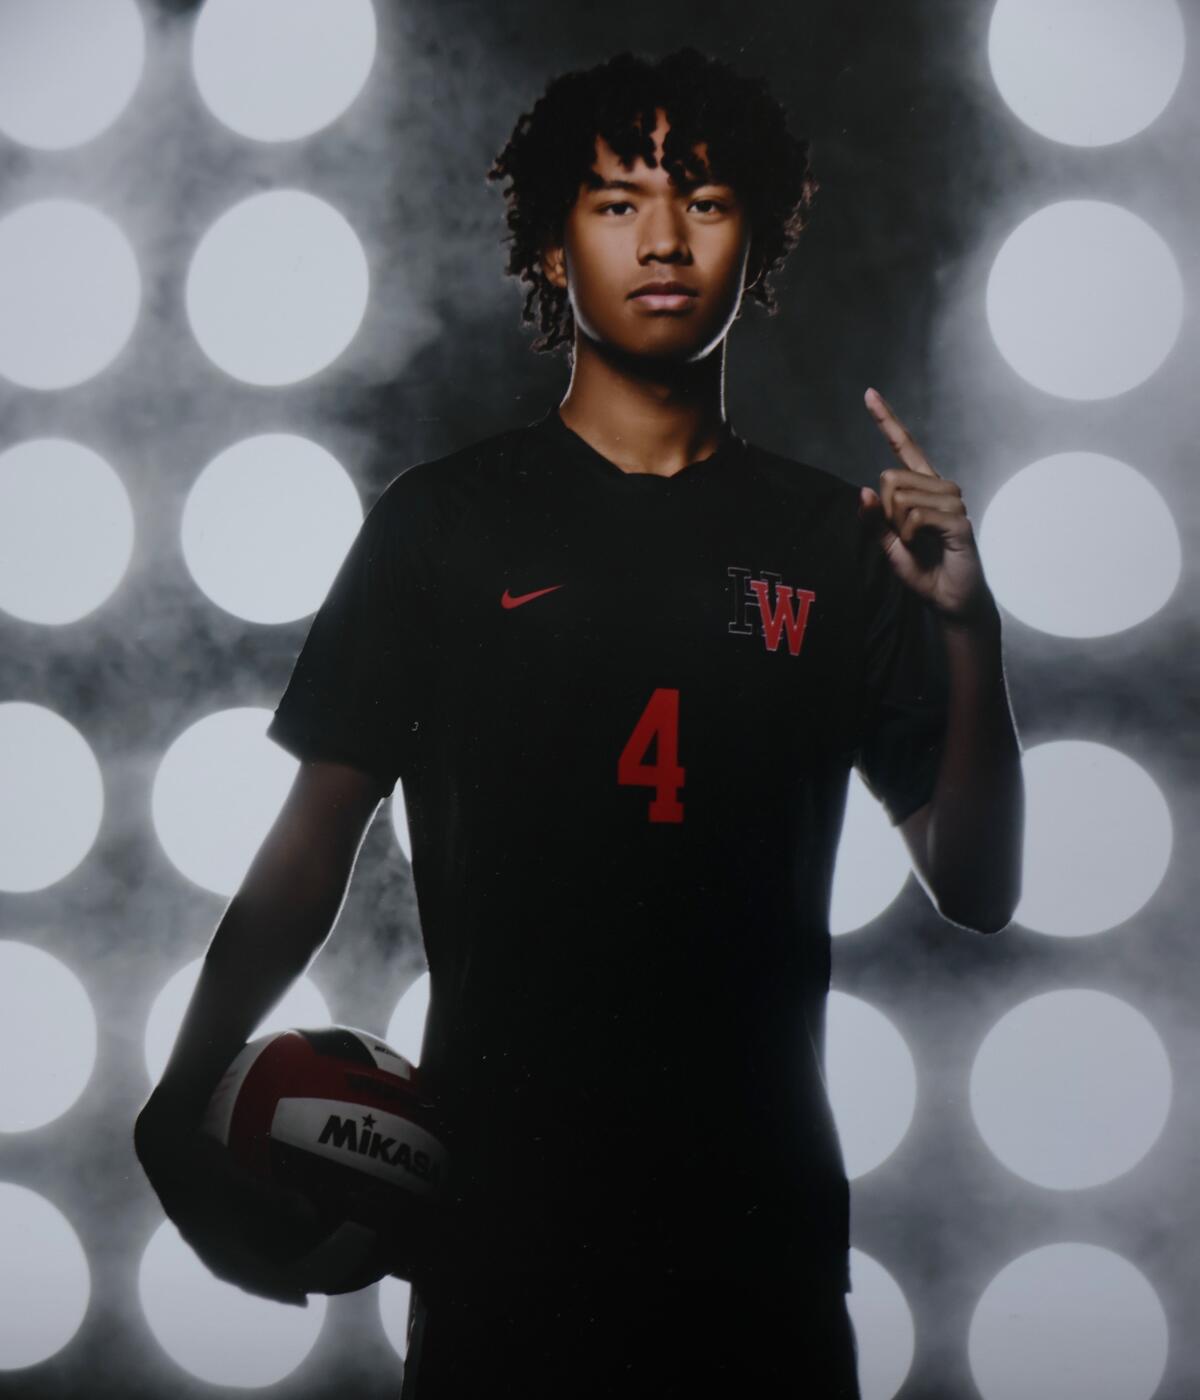  A teenage boy in dark T-shirt with a red No. 4 and the letter W points with one finger and holds a volleyball 